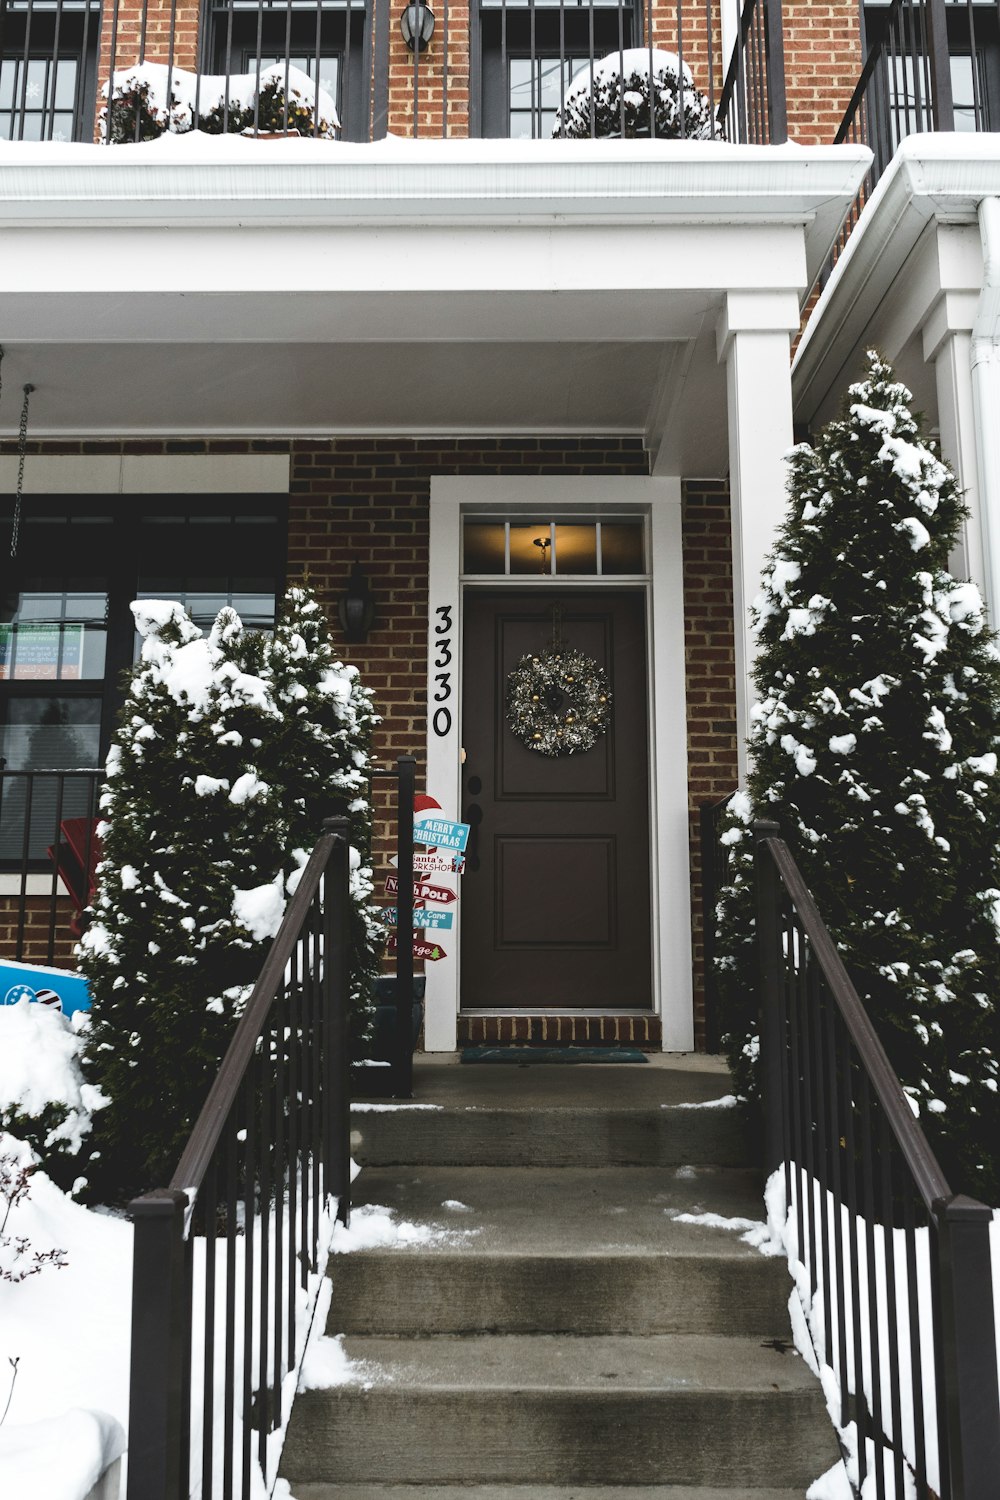 snow covering on trees and house